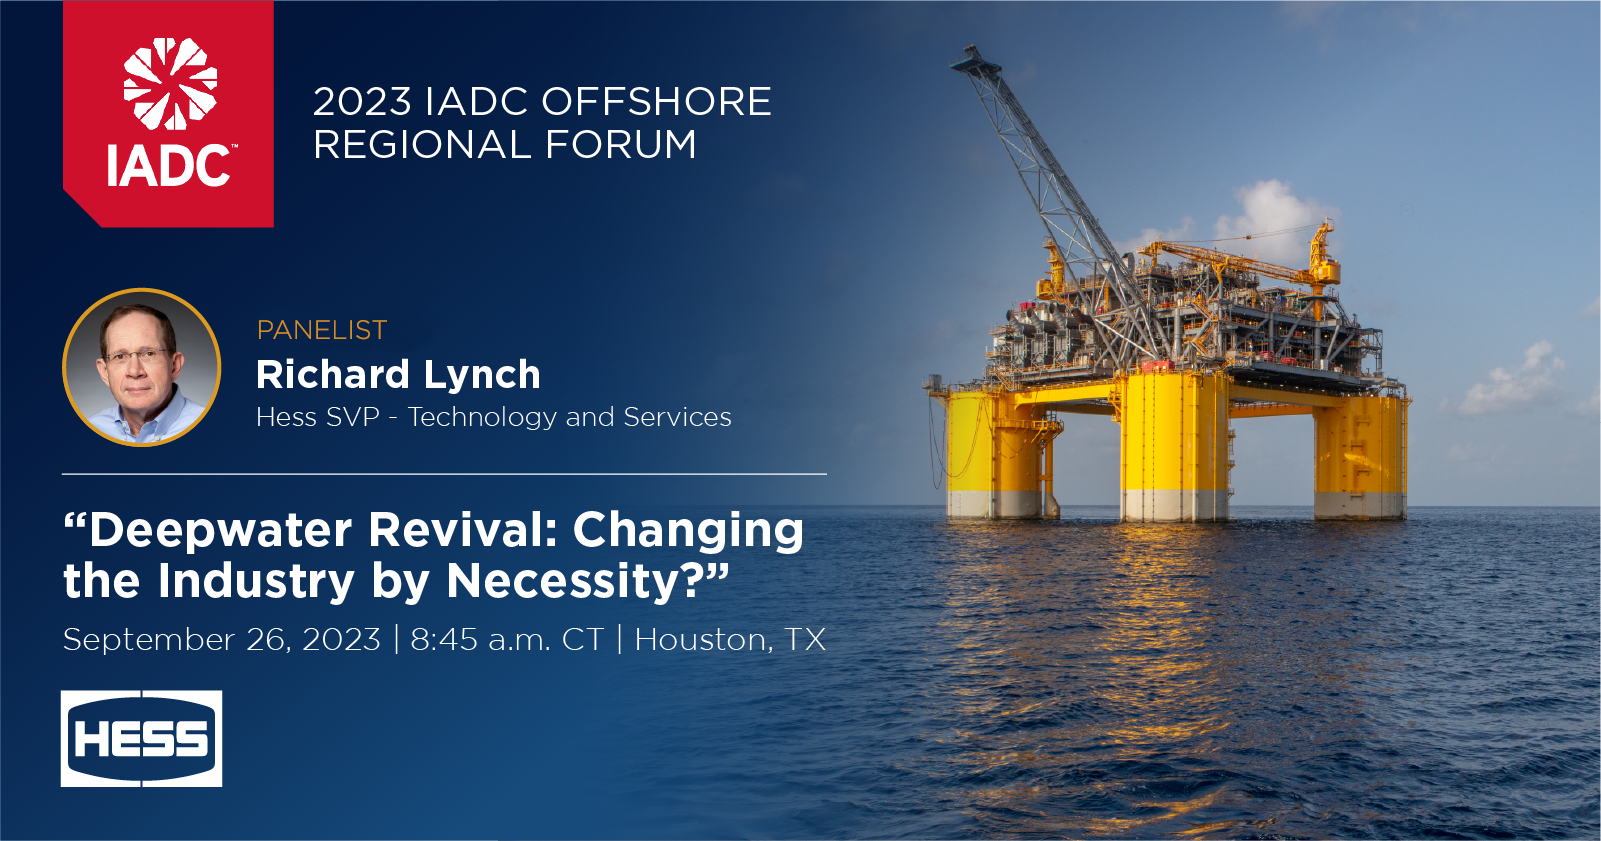 Richard Lynch to Participate in Panel at IADC 2023 Offshore Regional Forum